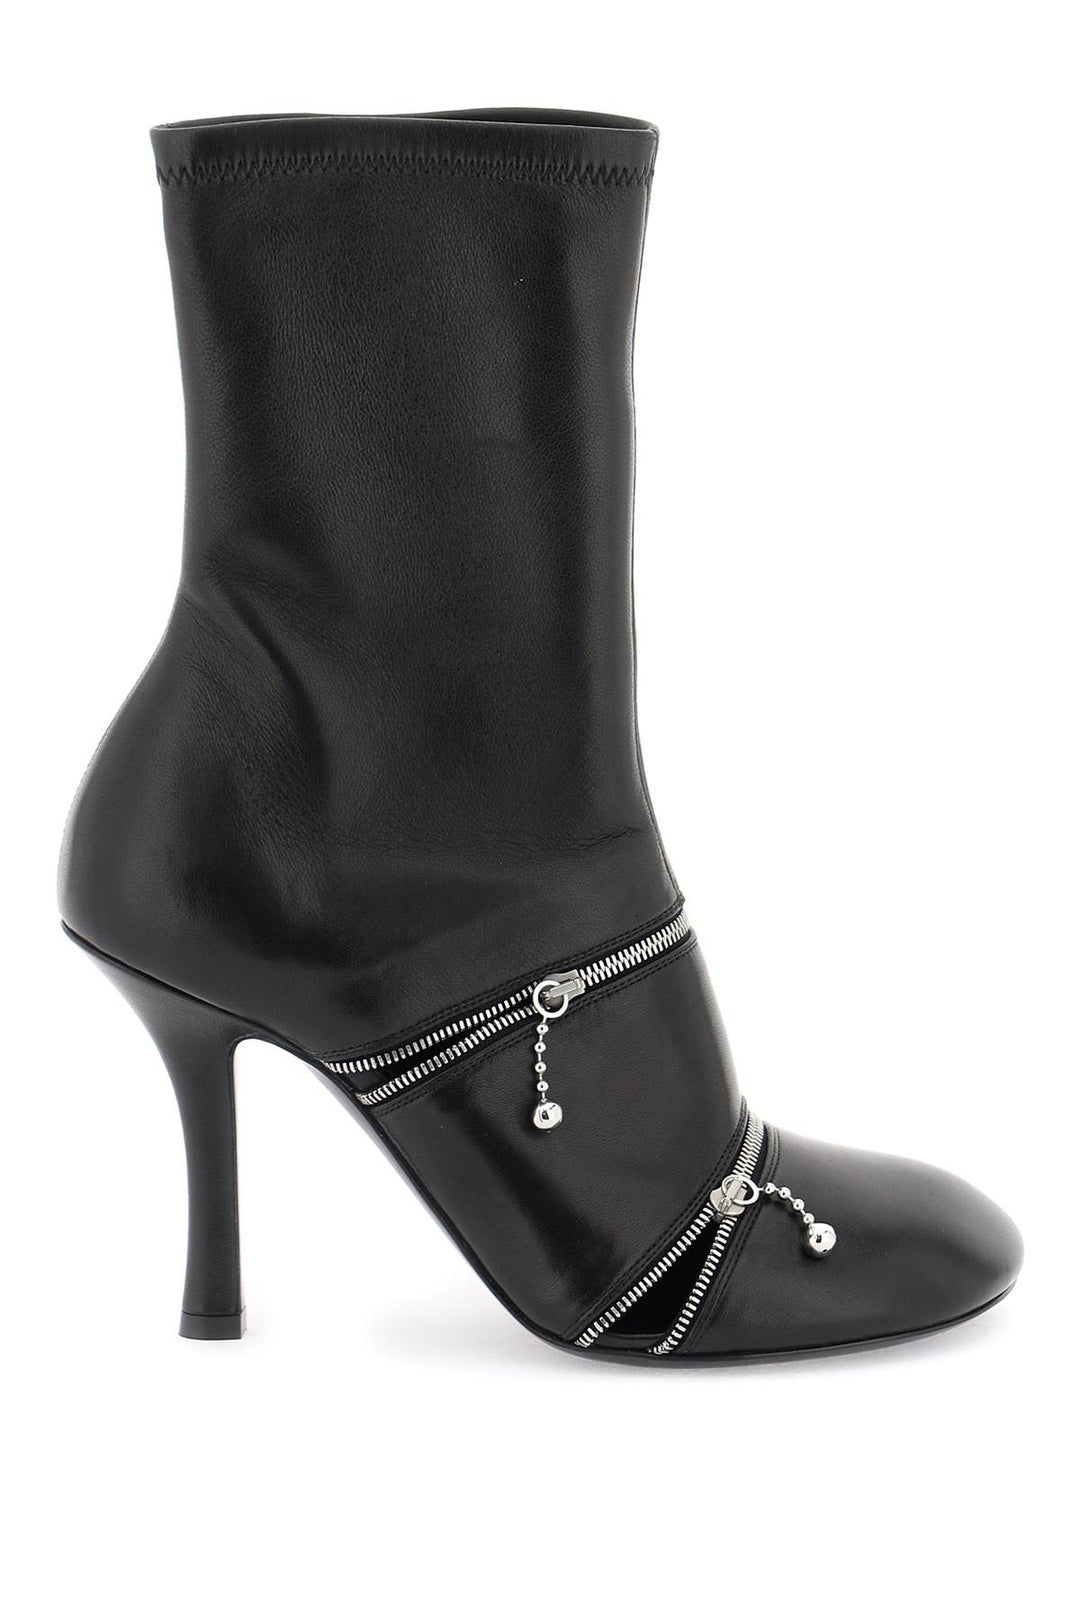 Burberry Leather Peep Ankle Boots   Nero